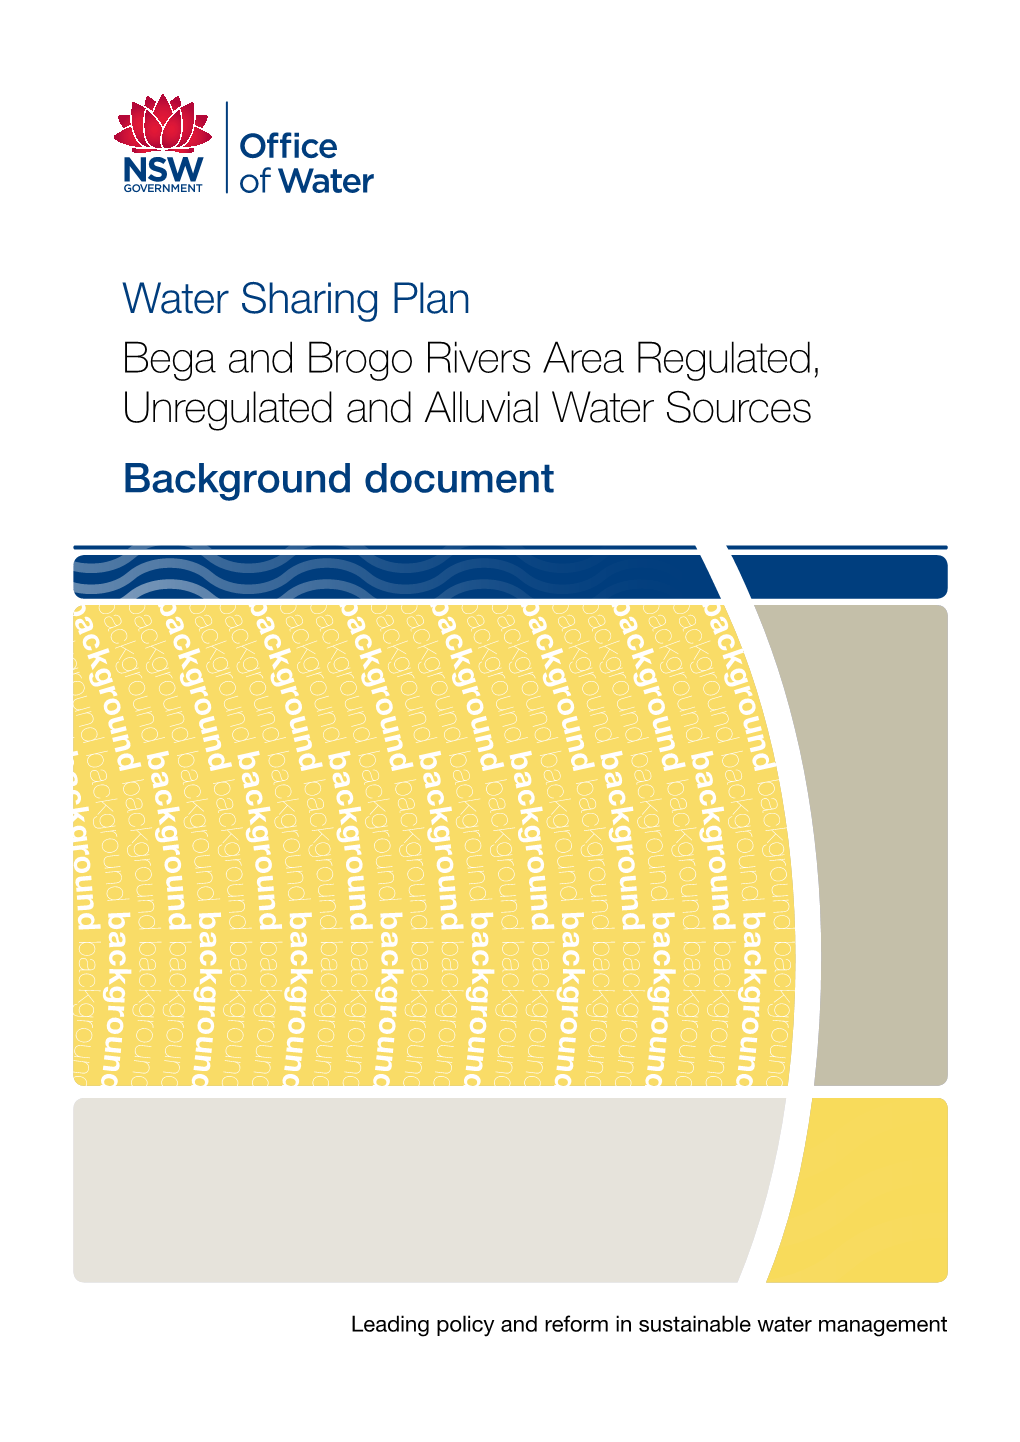 Water Sharing Plan for the Bega and Brogo Rivers Area Regulated, Unregulated and Alluvial Water Sources - Background March 2011 ISBN 978 1 74263 180 6